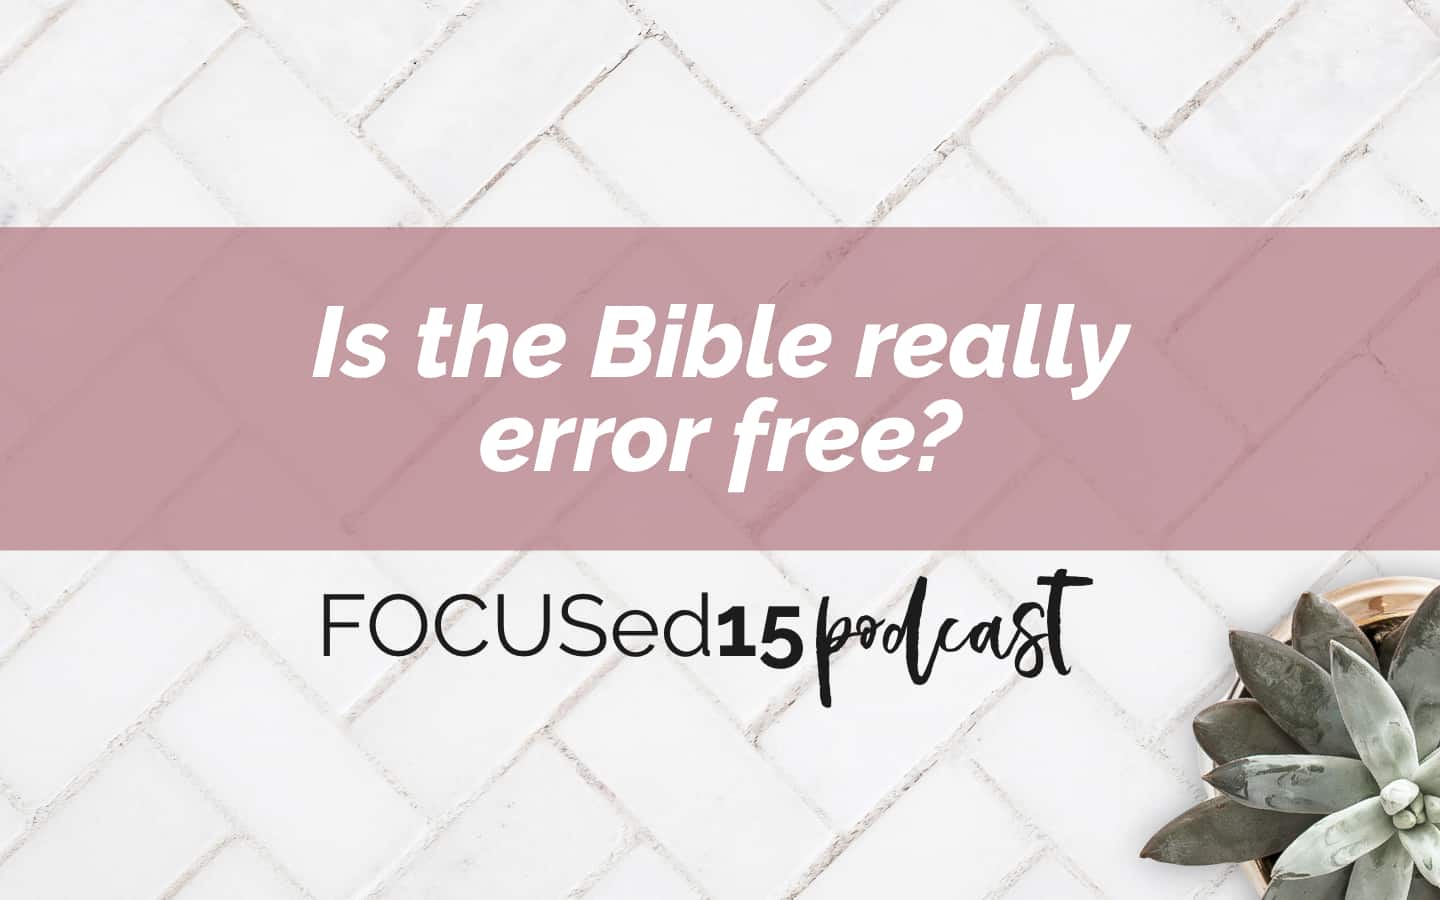 Is the Bible really error free